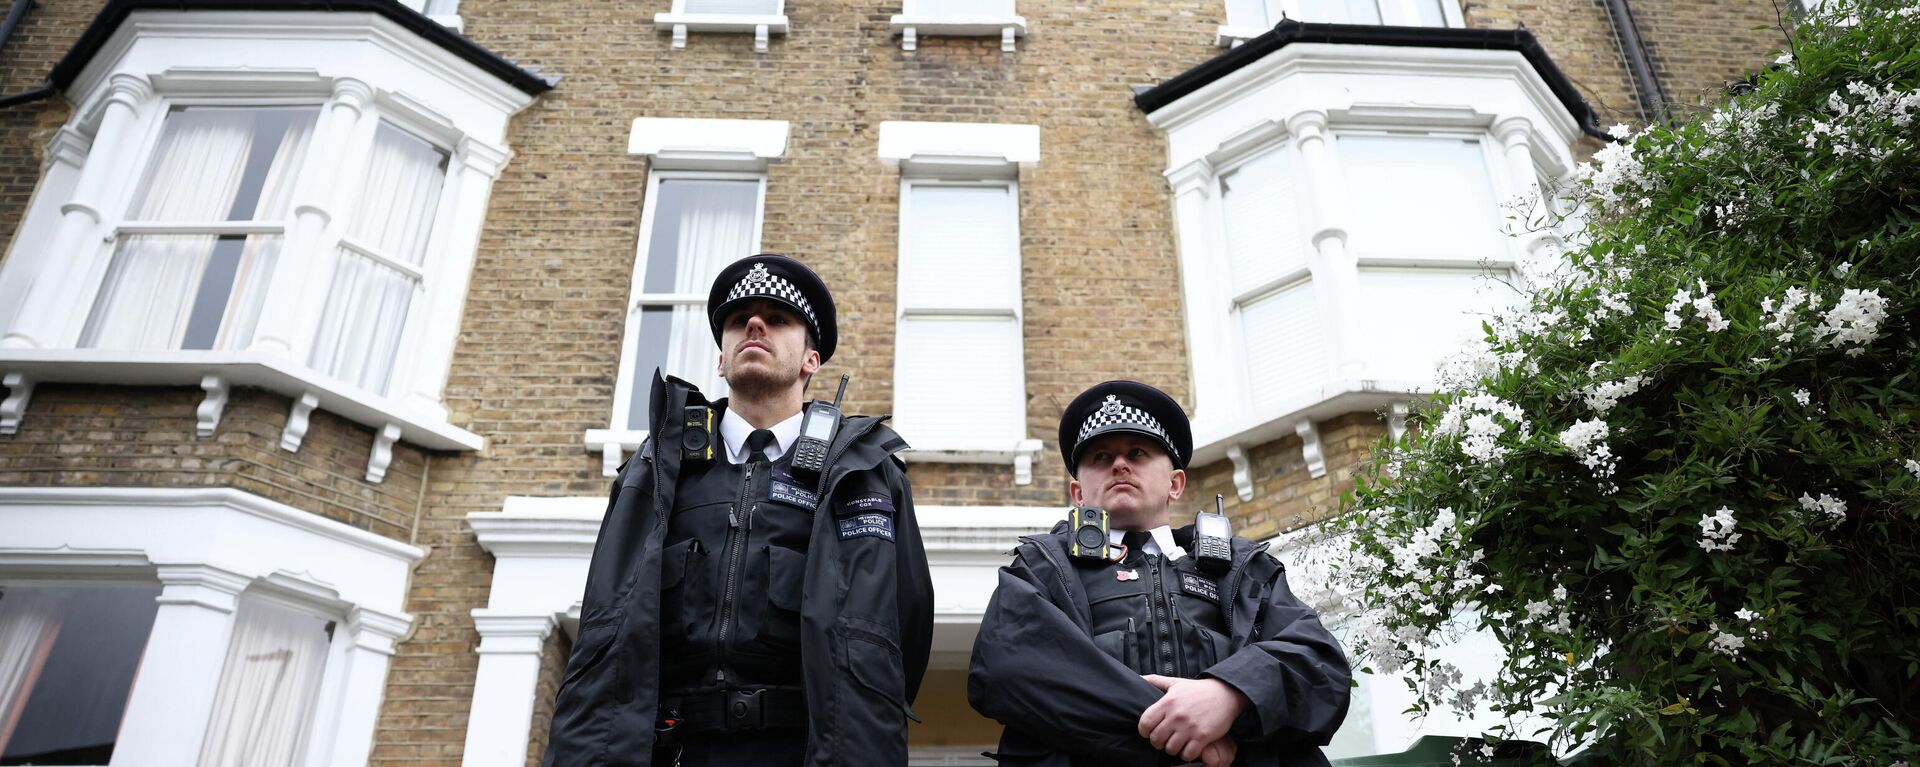 Police stand guard outside house believed to be address belonging to man arrested in connection with killing of British MP Amess, in London - Sputnik International, 1920, 21.10.2021